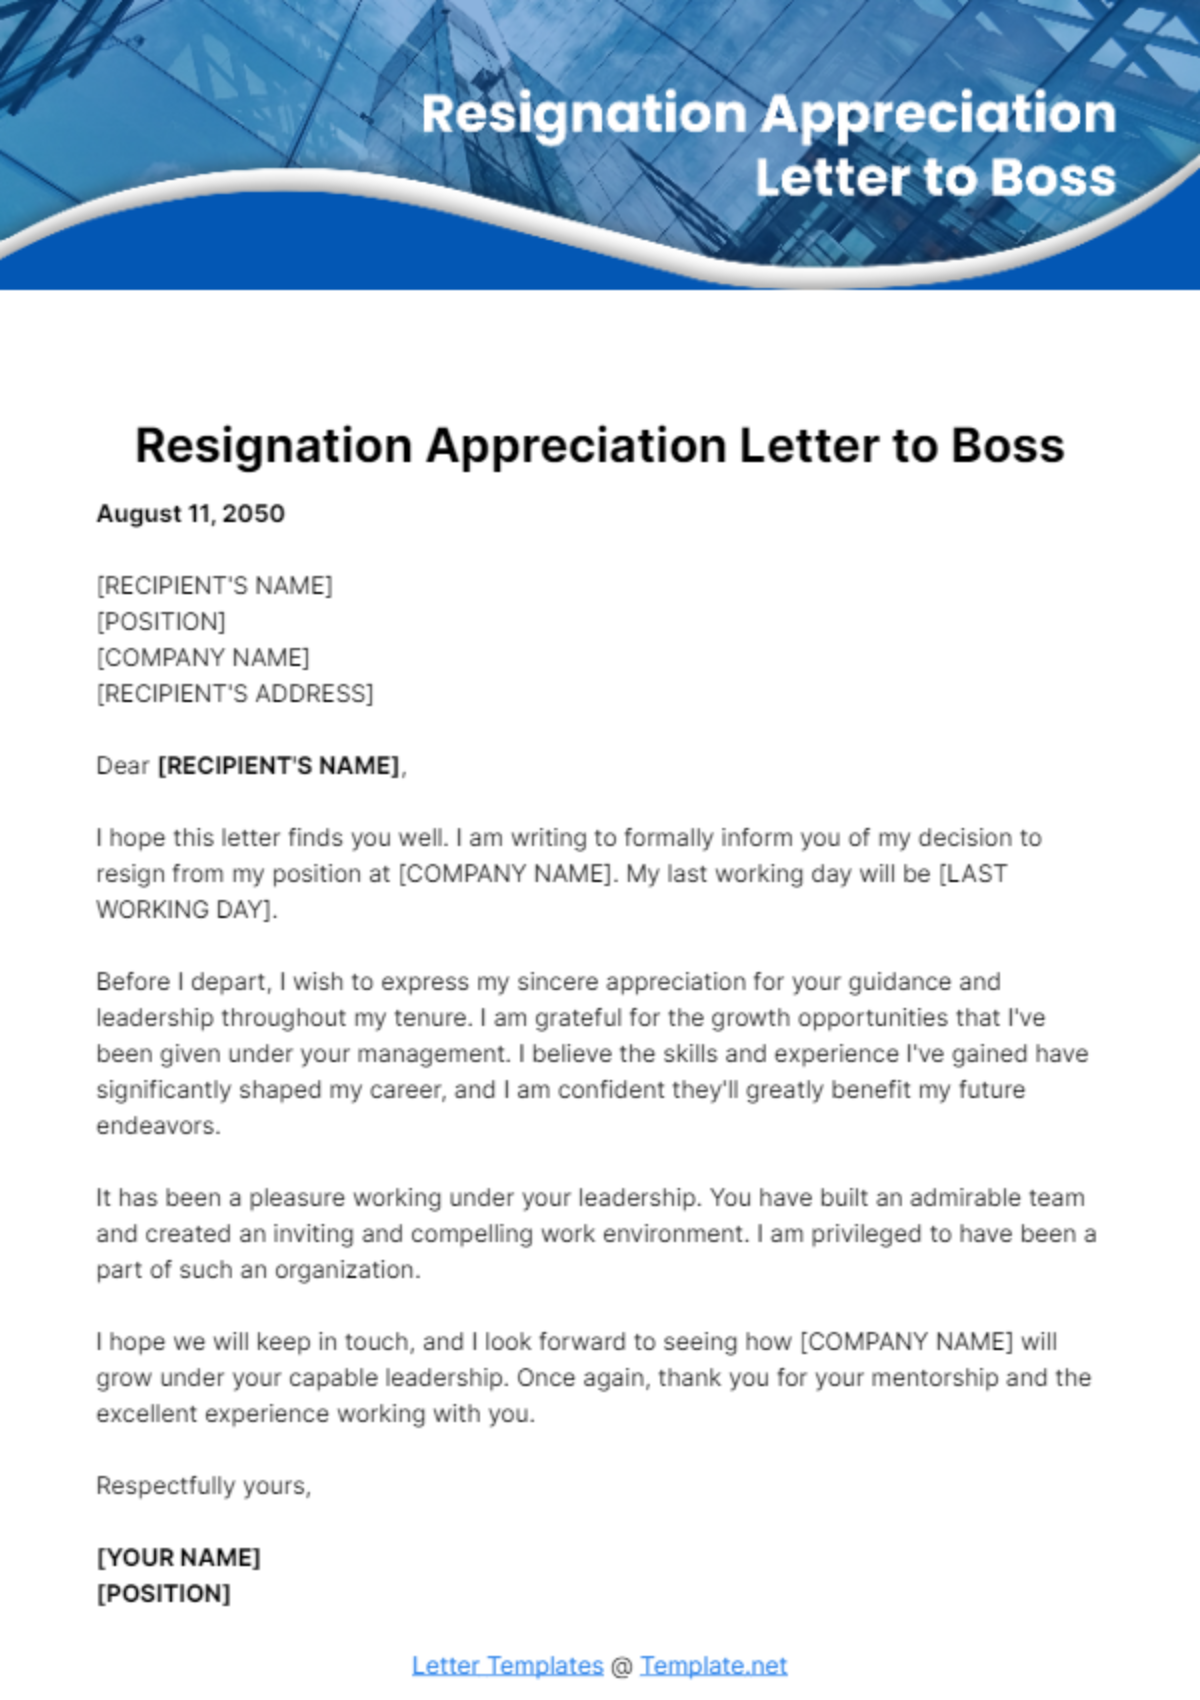 Free Resignation Appreciation Letter to Boss Template